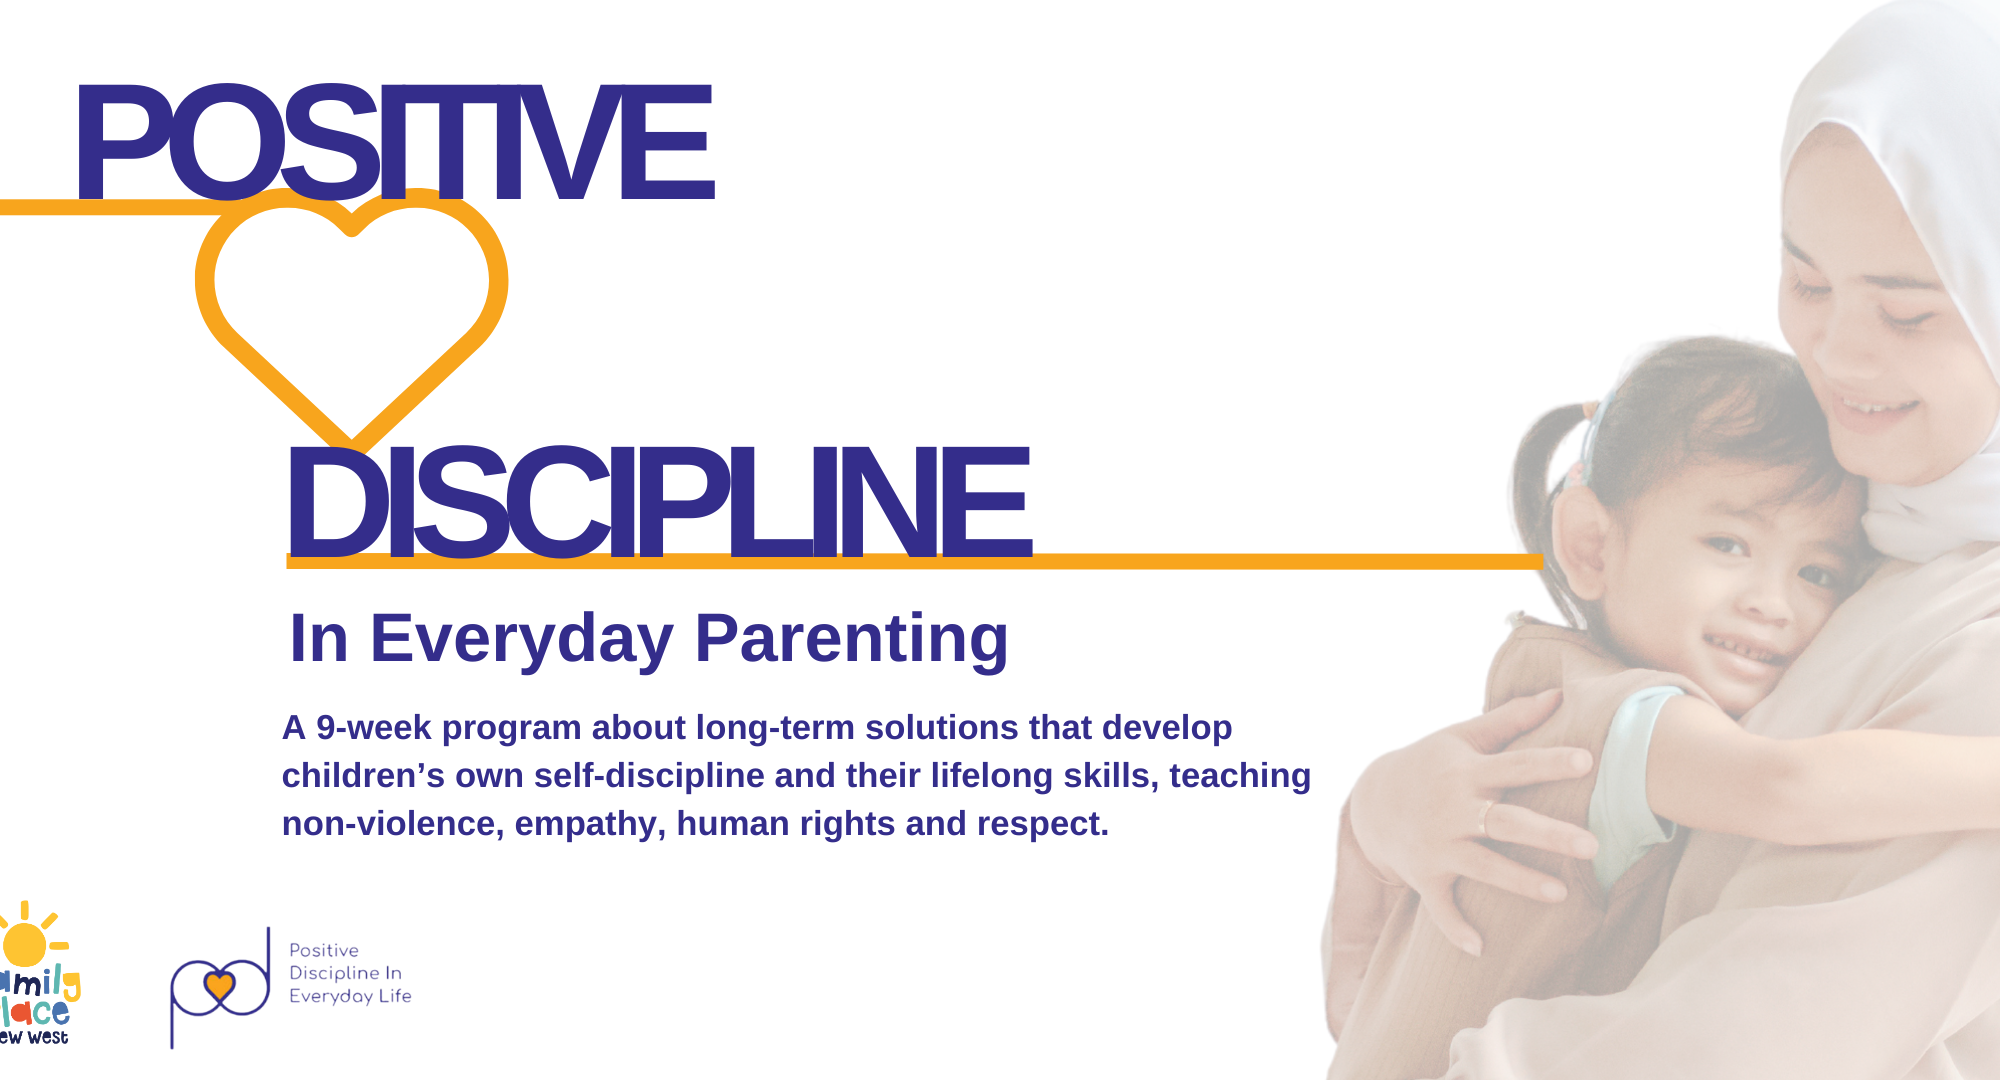 Image of a woman and child with Positive Discipline program information